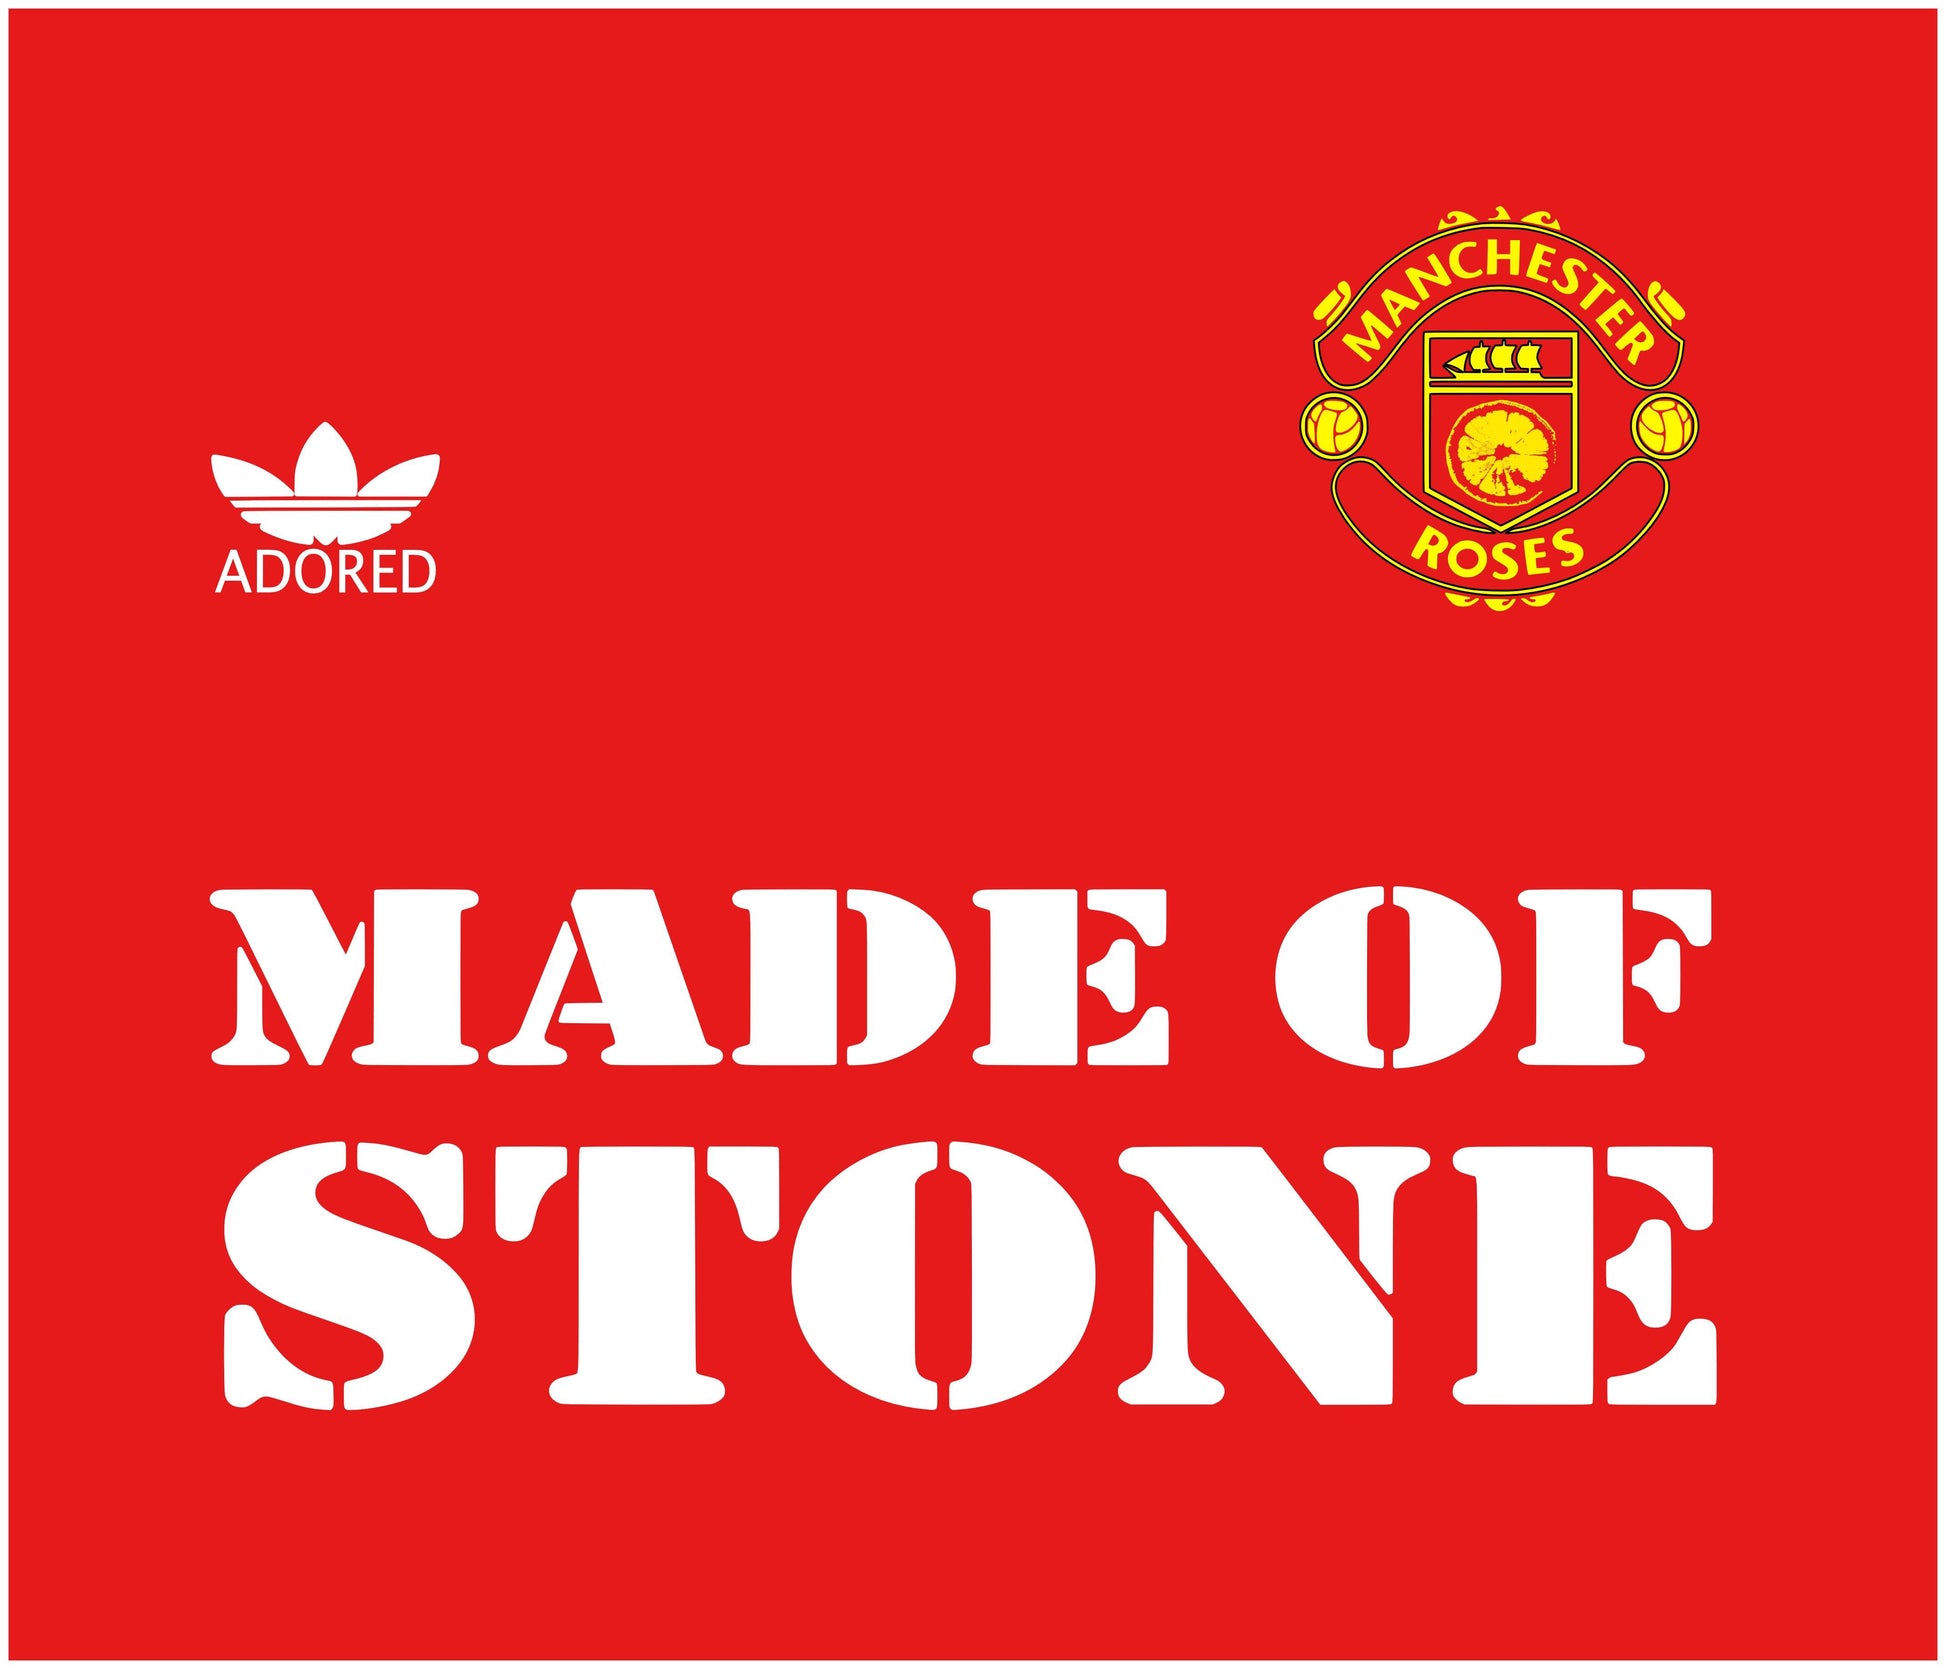 MANCHESTER ROSES (Red Version): T-Shirt Inspired by The Stone Roses & Football. - SOUND IS COLOUR